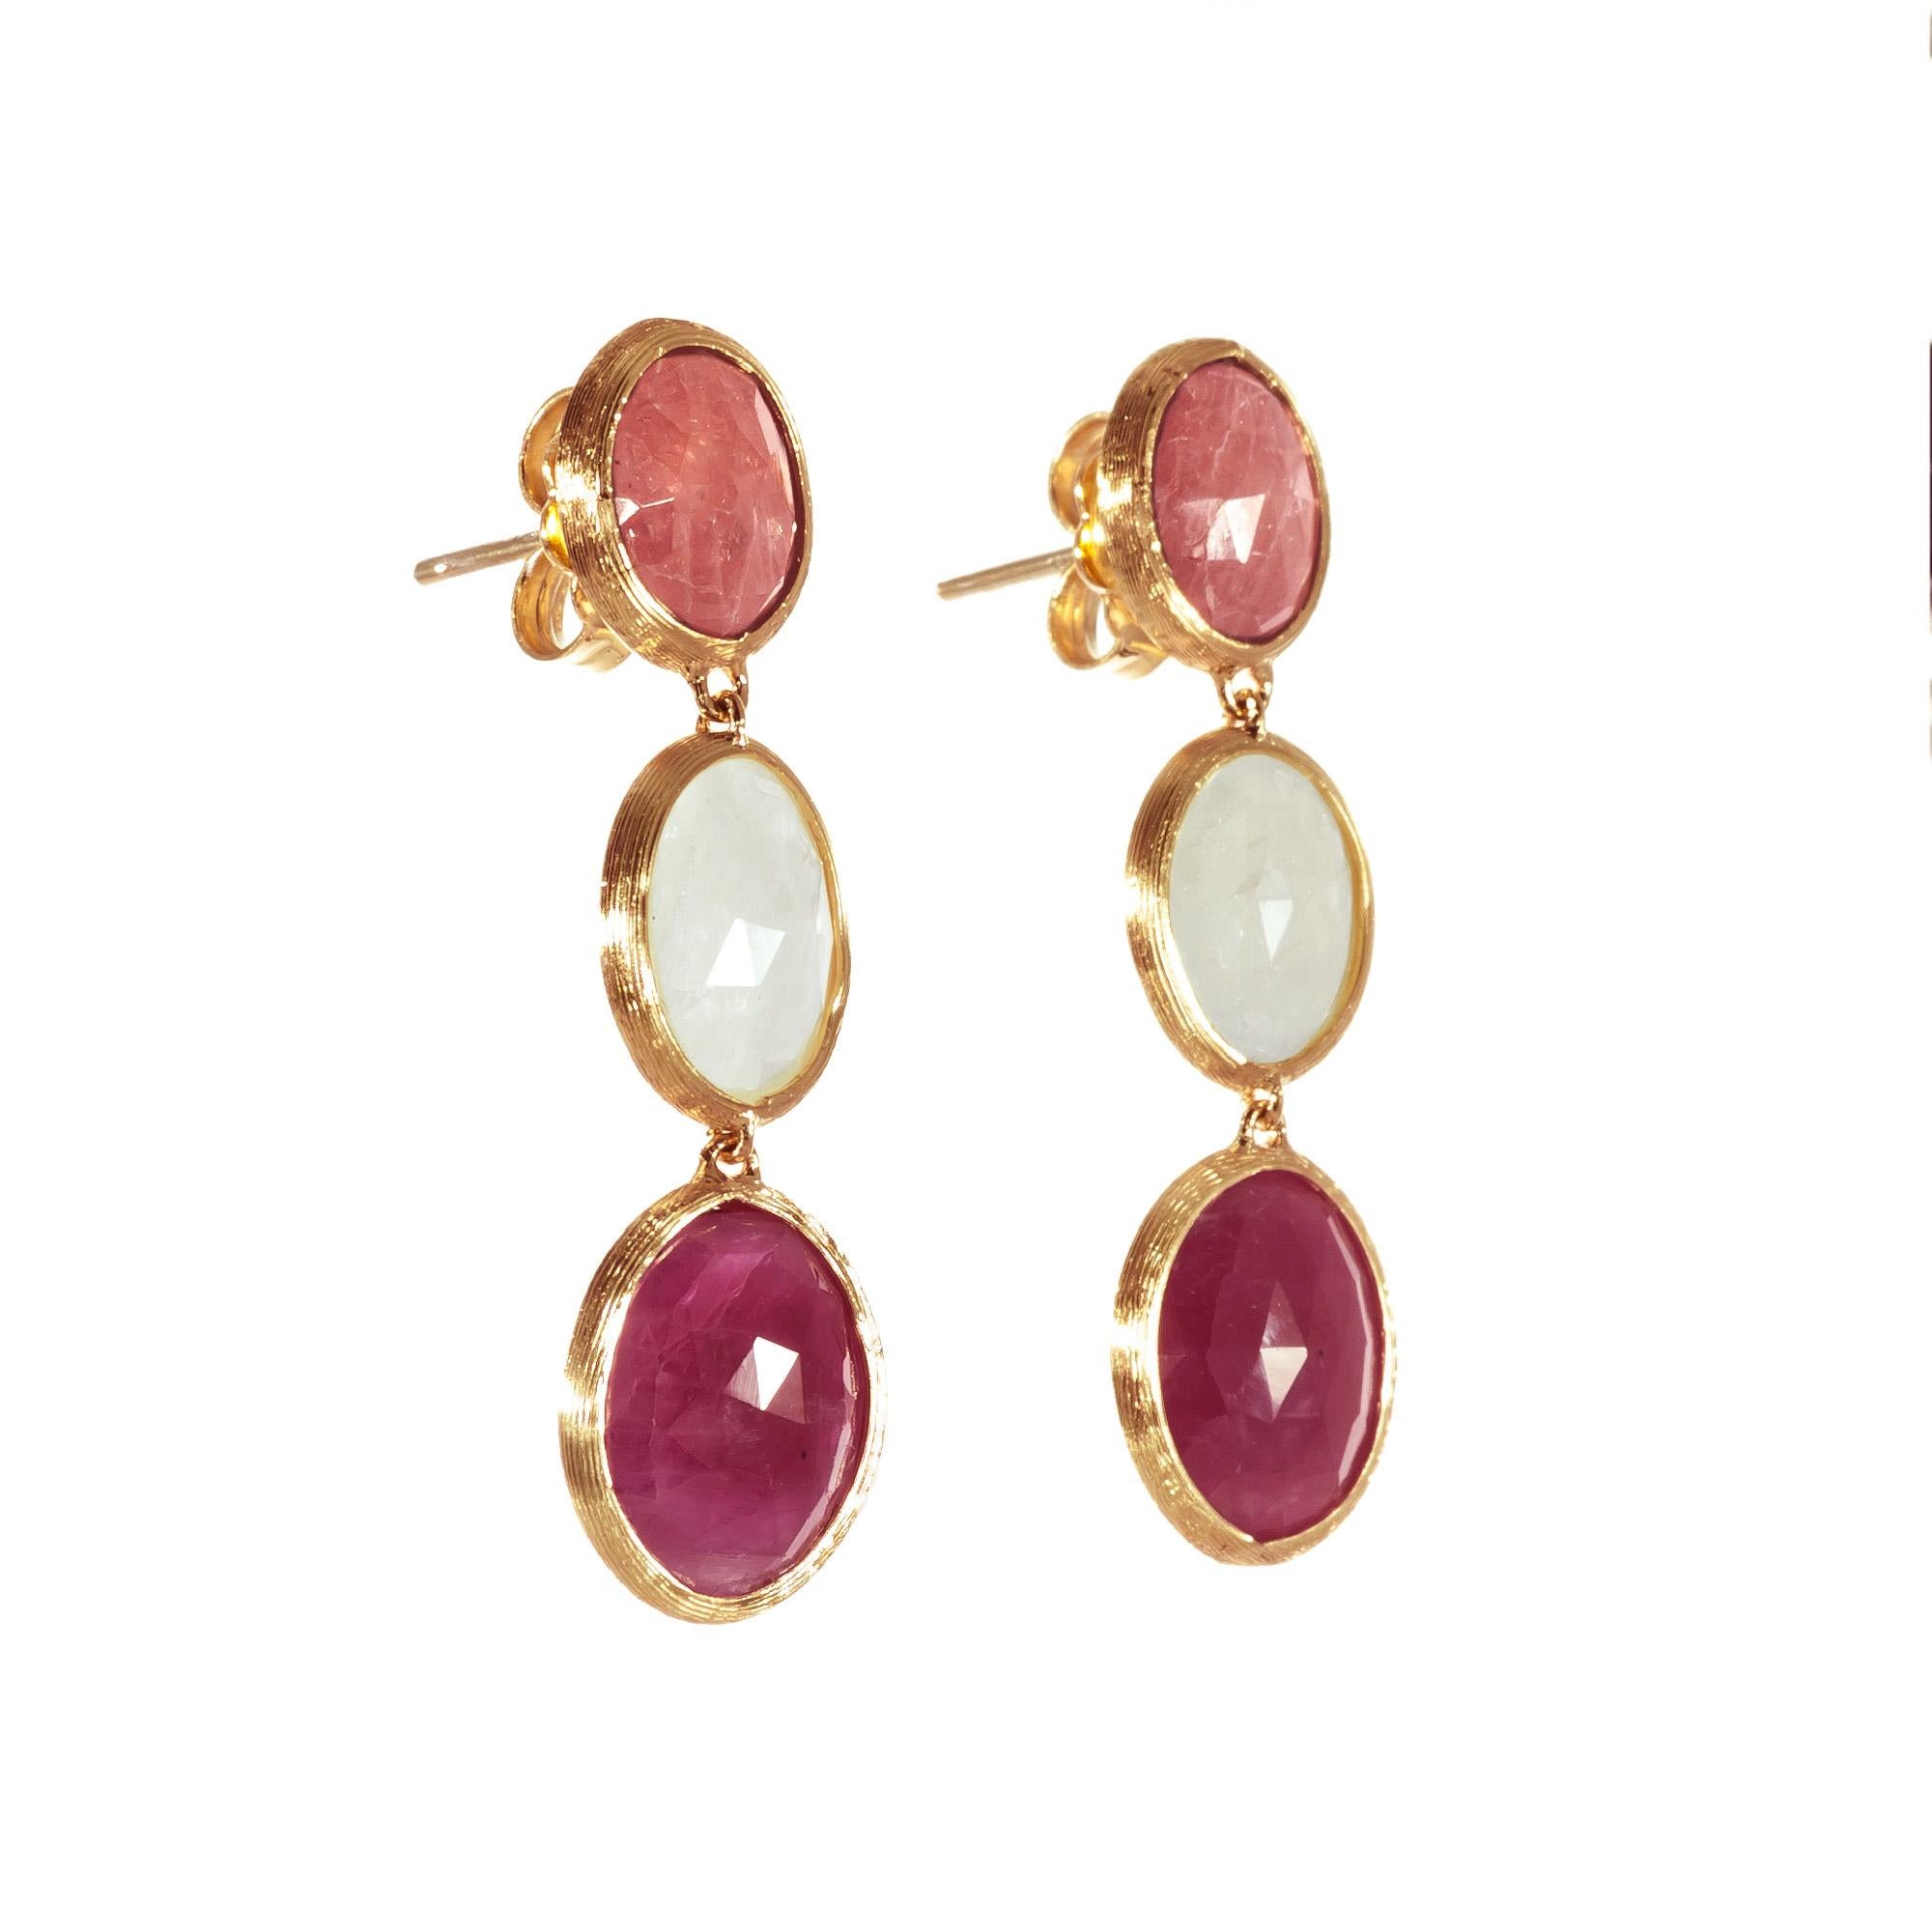 Marco Bicego Siviglia Collection 18k Yellow Gold mixed sapphire gemstone drop dangle earrings.  Three graduating multi colored bezel set sapphires with signature hand engraved finish make up each earring which drops approximately 1 3/8 Inches. 

2